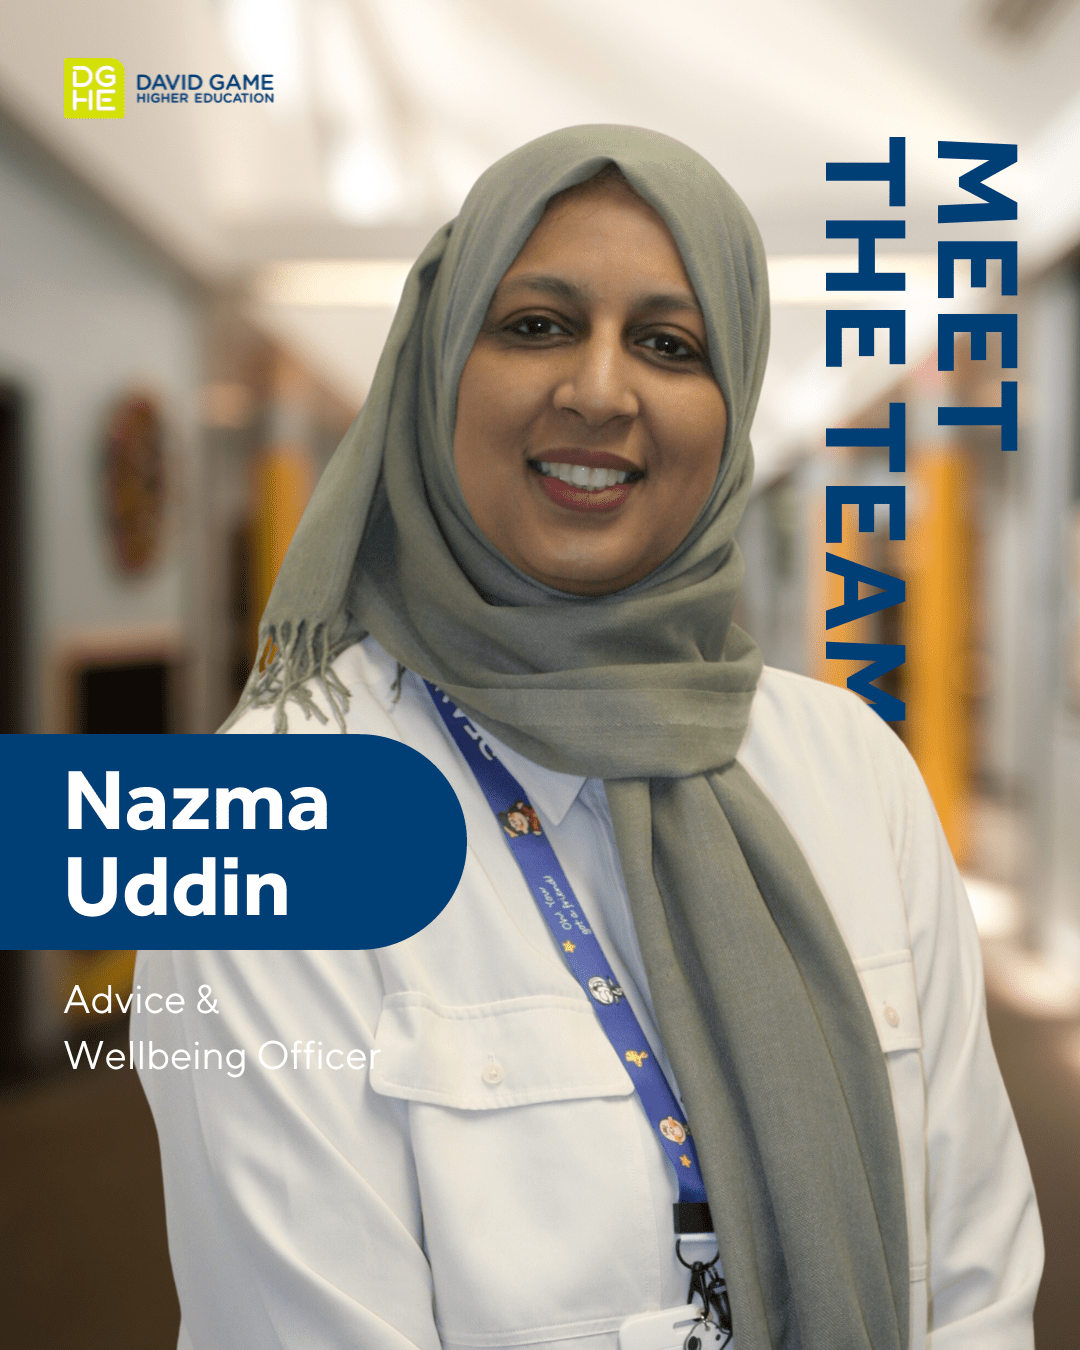 Welcoming Nazma Uddin to the DGHE Family